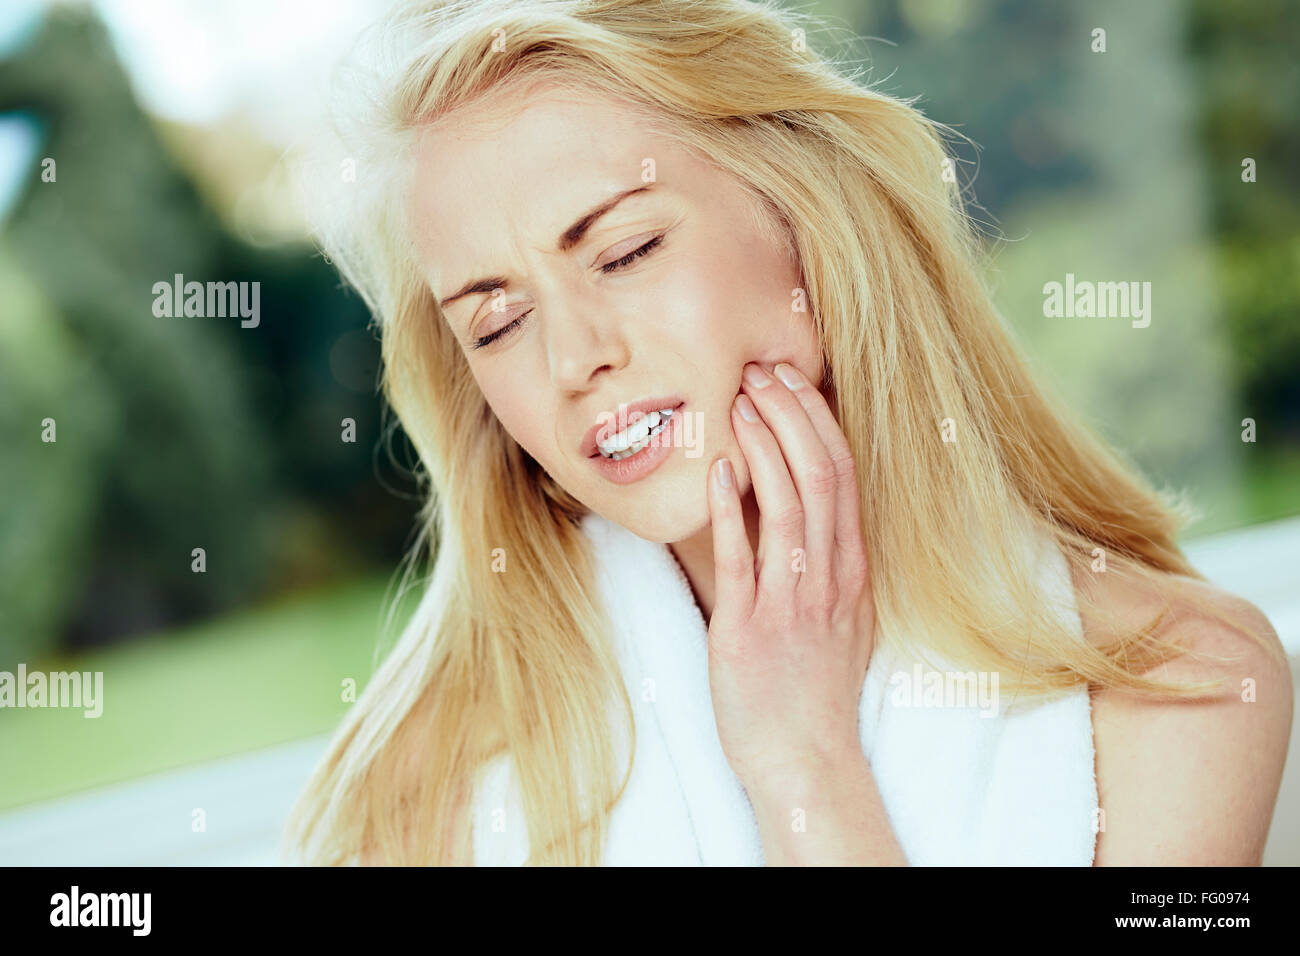 Girl with toothache Stock Photo